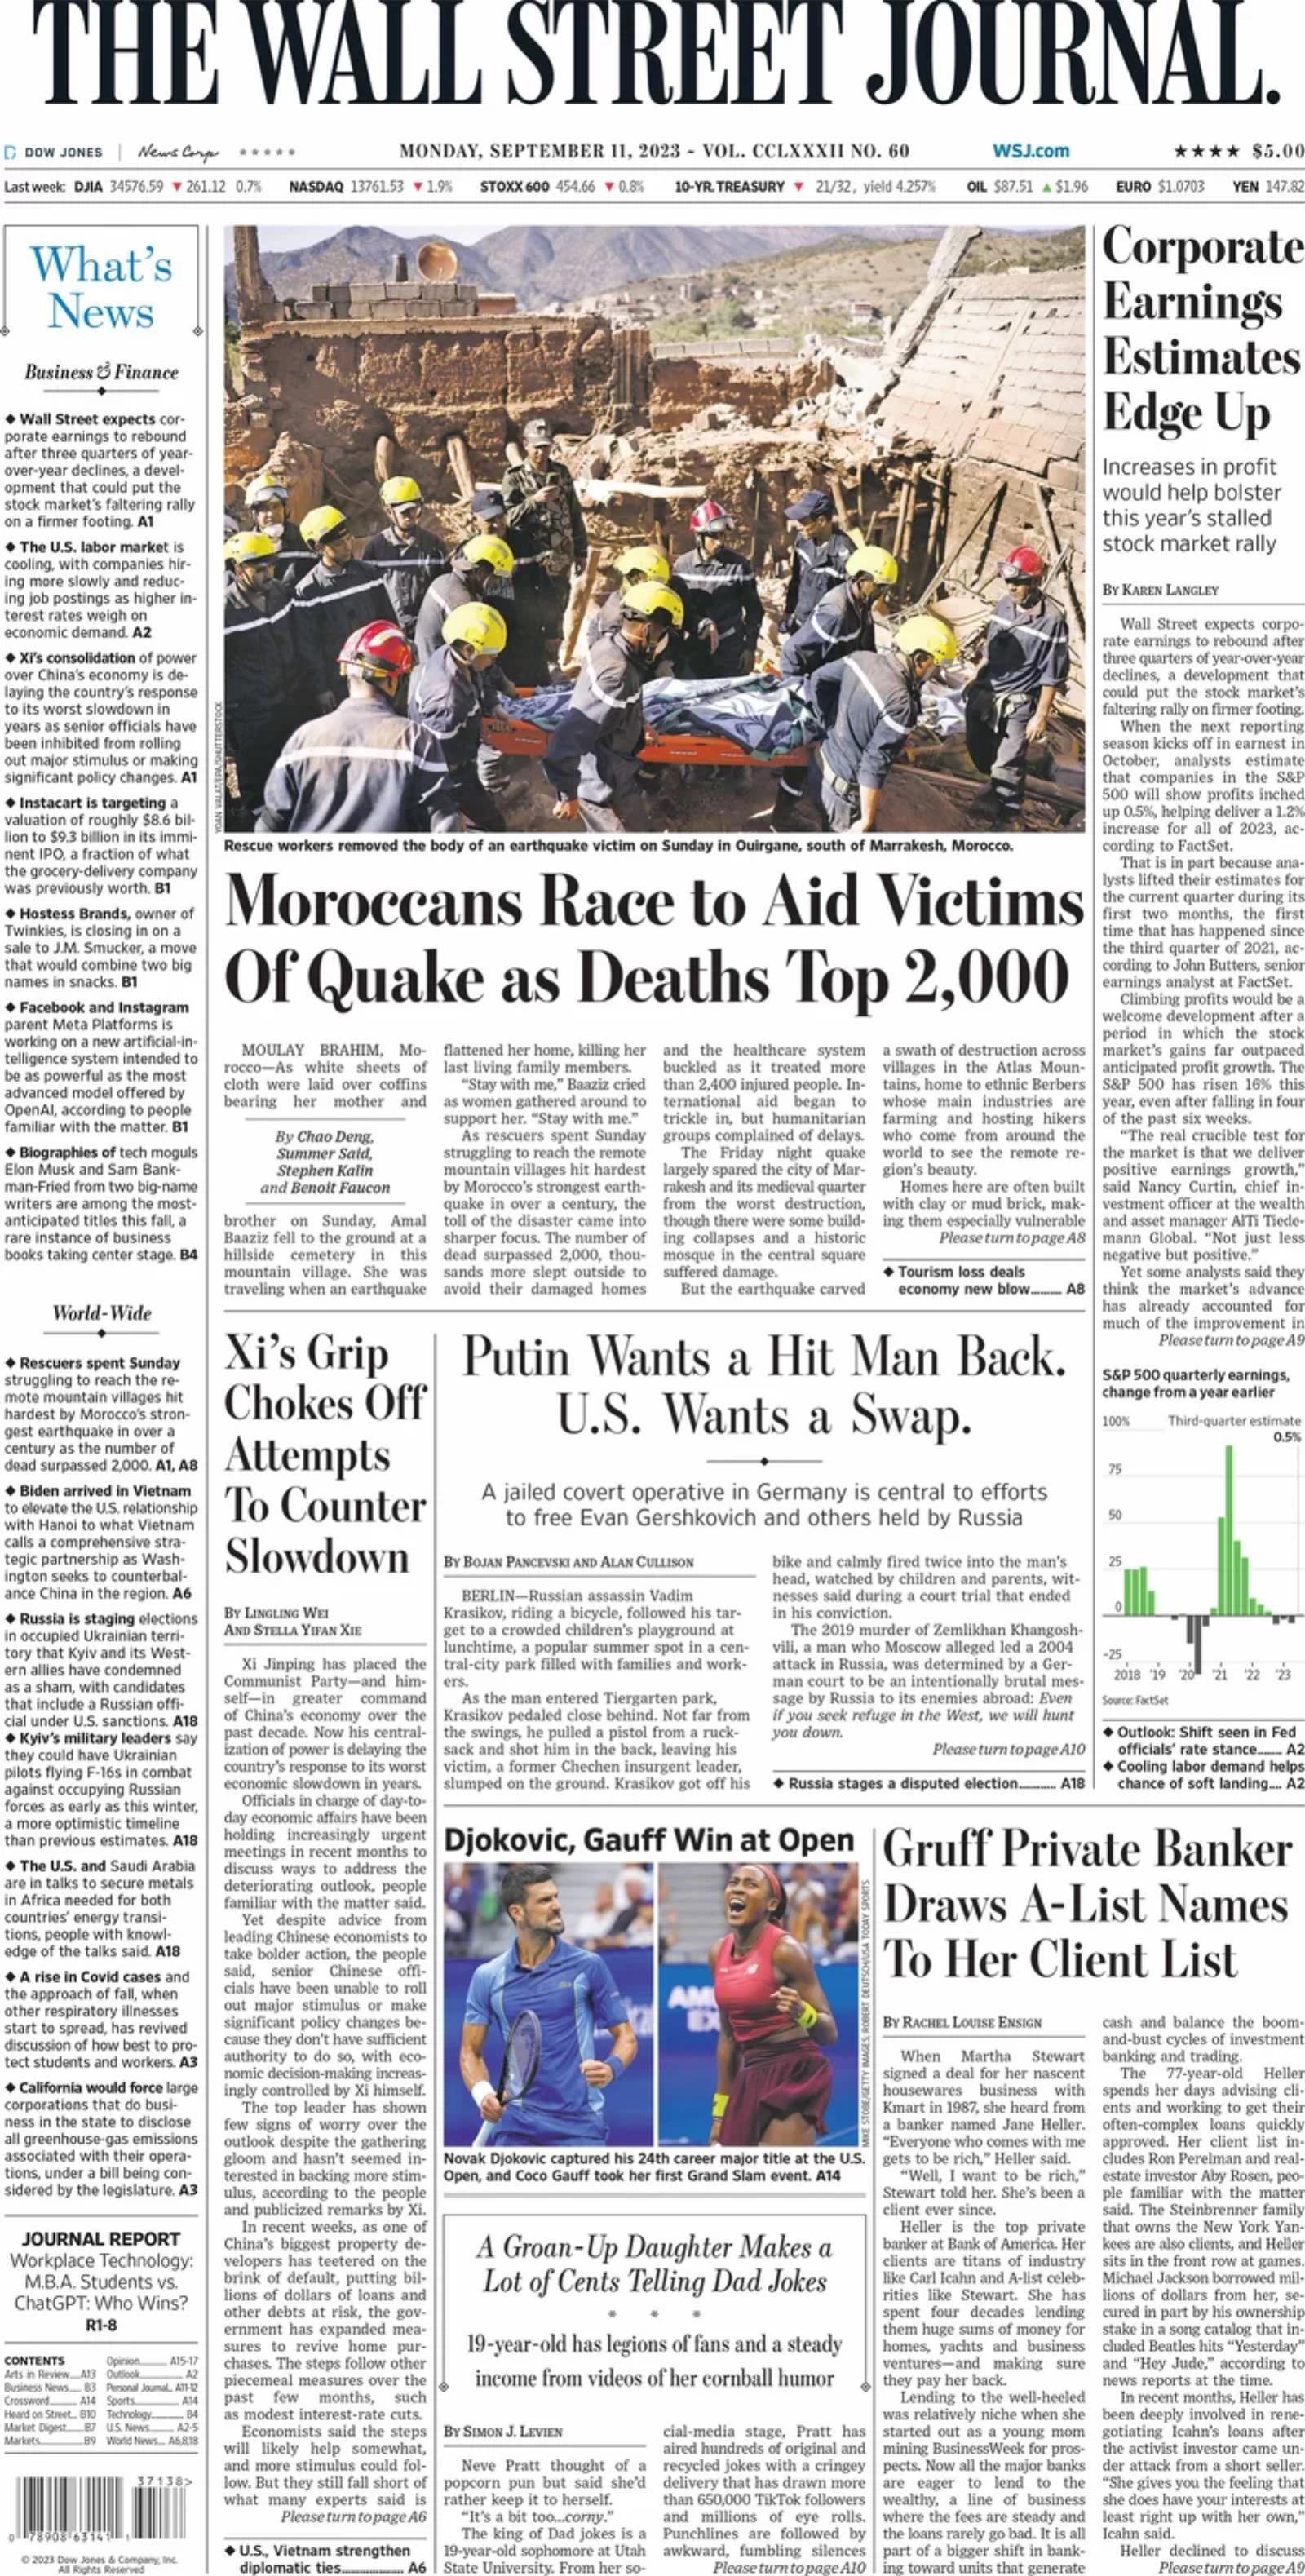 The front page of The Wall Street Journal, Sept. 11, 2023